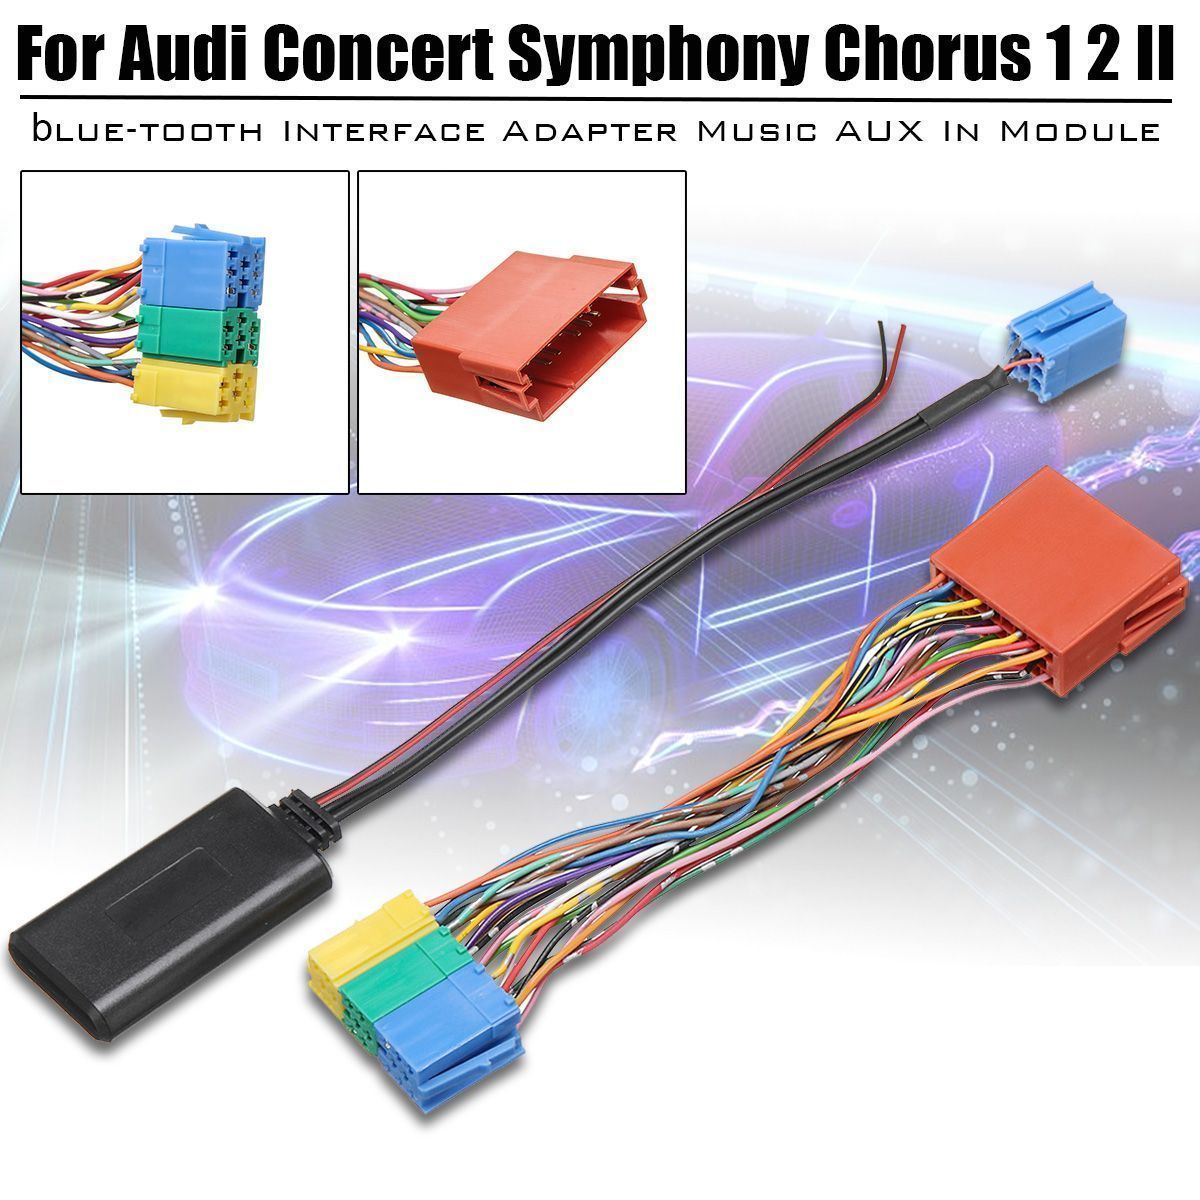 bluetooth-Adapter-MP3-AUX-In-Music-CD-for-Audi-Concert-Symphony-Chorus-1-2-II-1485159